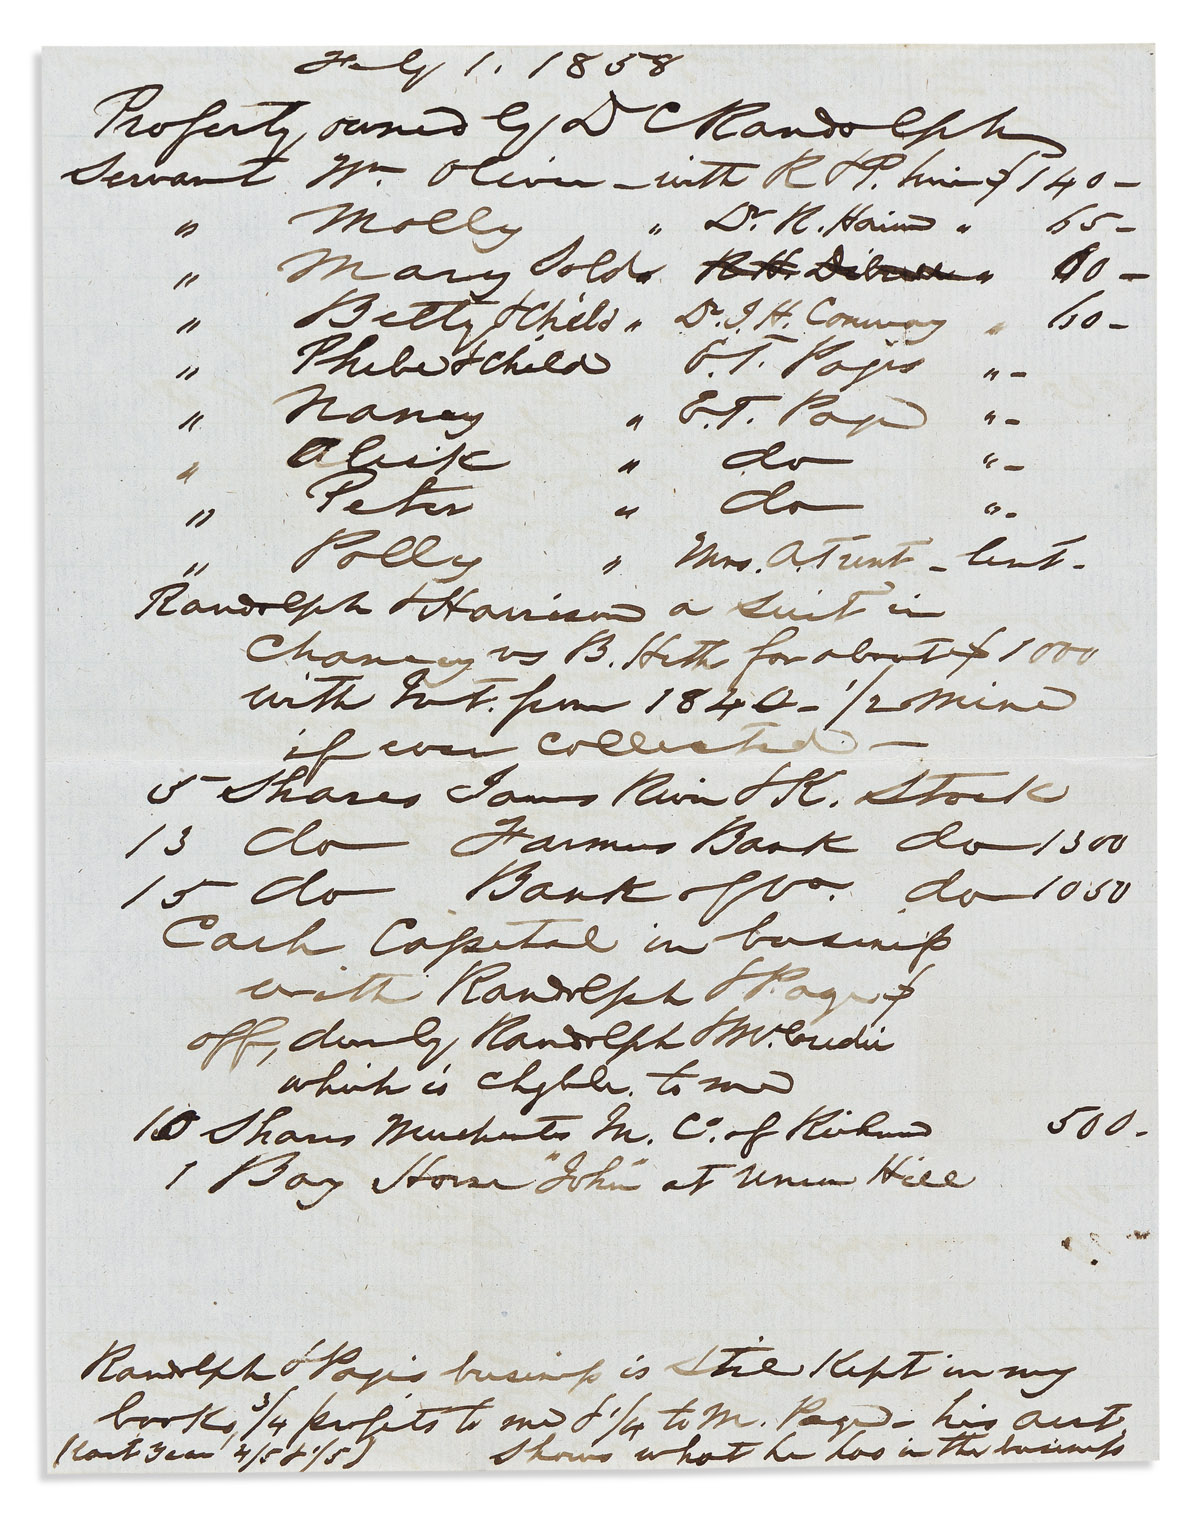 (SLAVERY & ABOLITION.) Archive of the slave-owning Randolph family of Virginia.